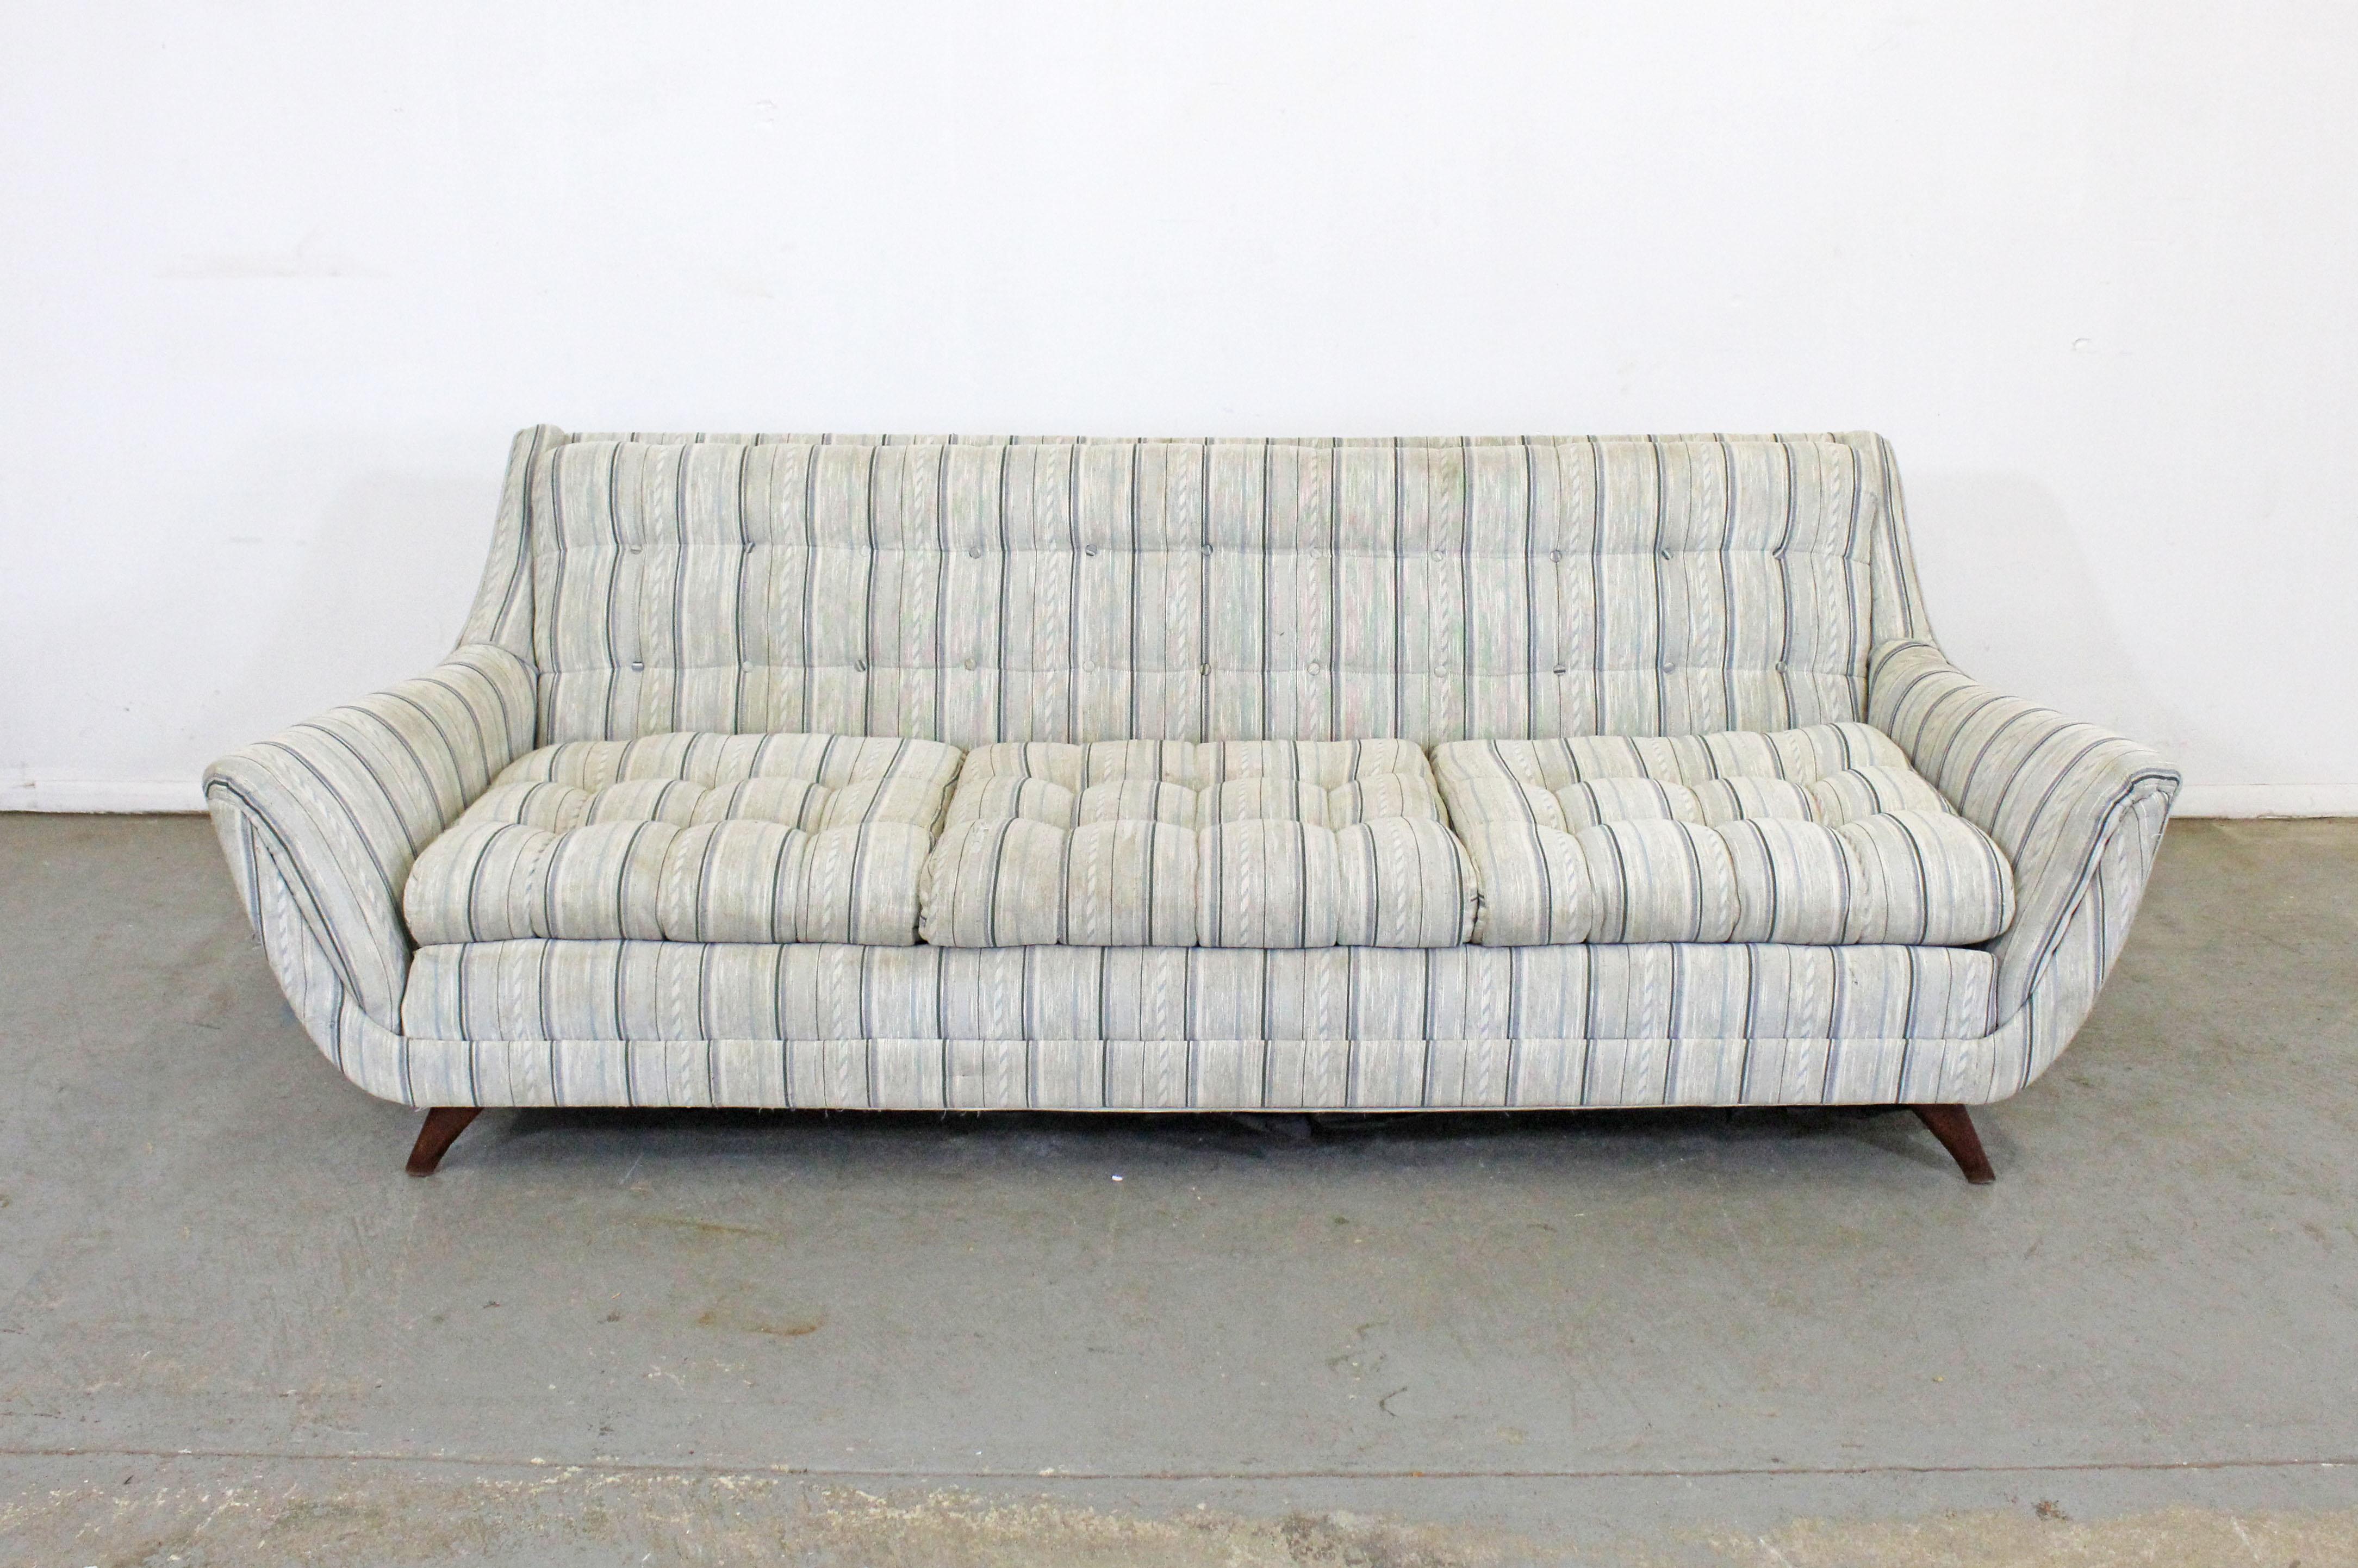 Offered is a gorgeous vintage Mid-Century Modern sofa, in the style of Adrian Pearsall for Bassett 'Prestige'. Features a tufted backs, 3 removable seat cushions, and sits on splayed walnut legs. In decent condition with noticeable age wear - needs